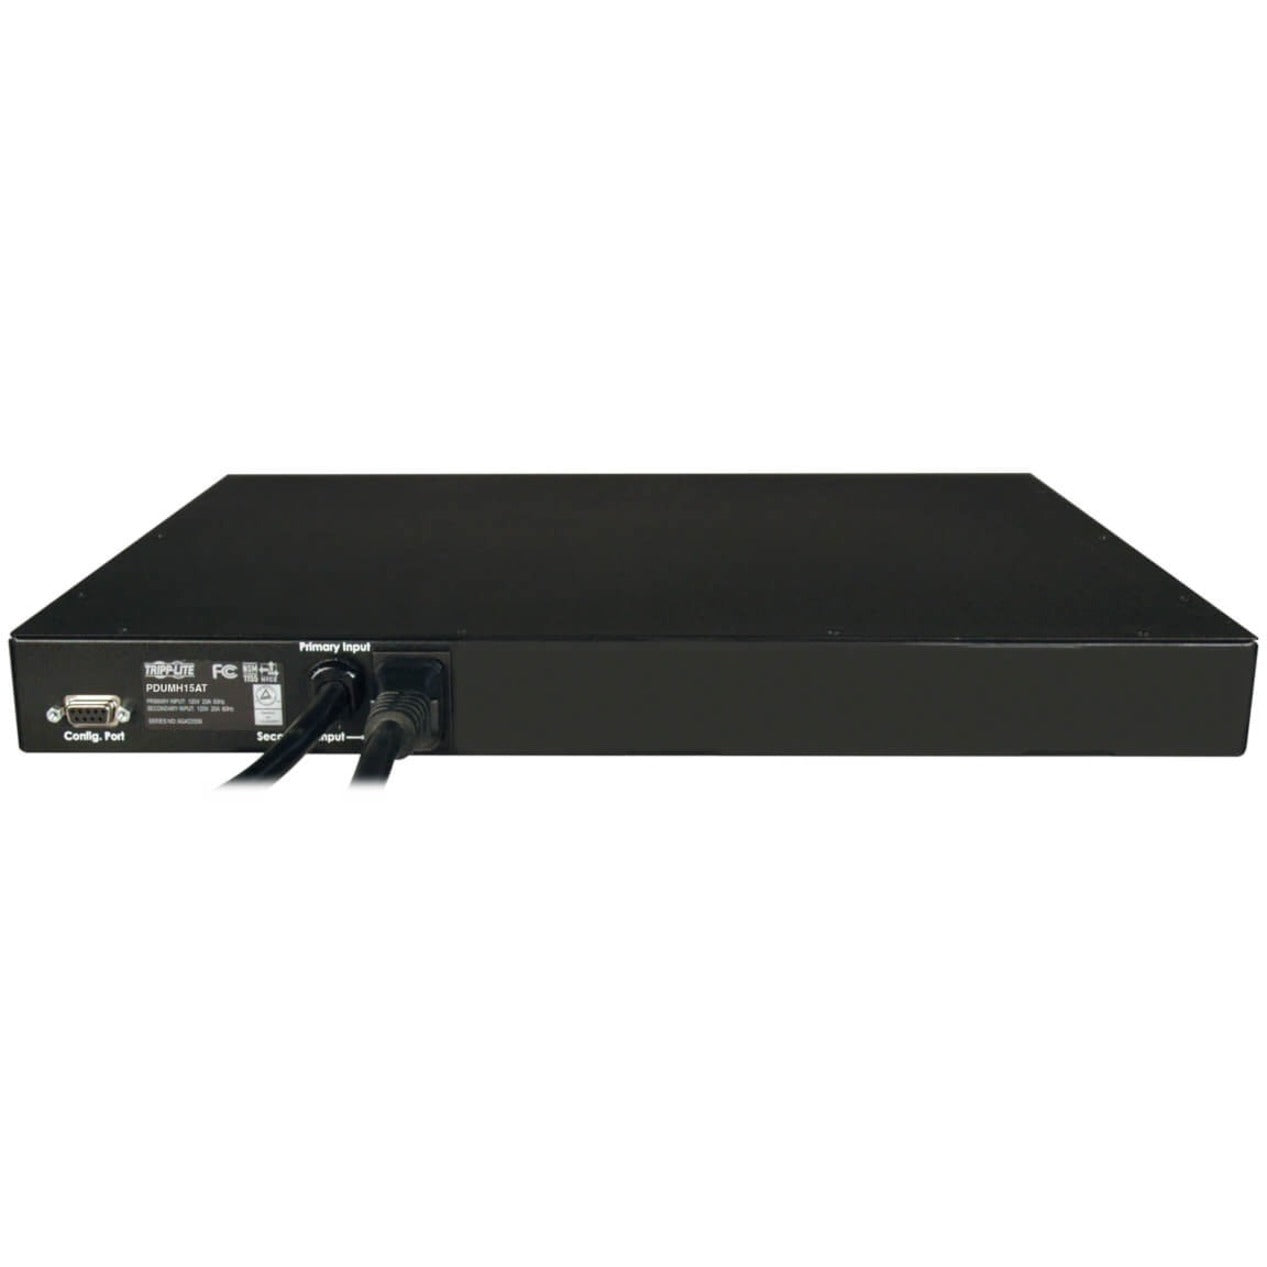 Tripp Lite PDUMH15AT PDU Metered ATS 120V 15A 8 Outlet, Dual UPS Protection, Remote Outlet Control